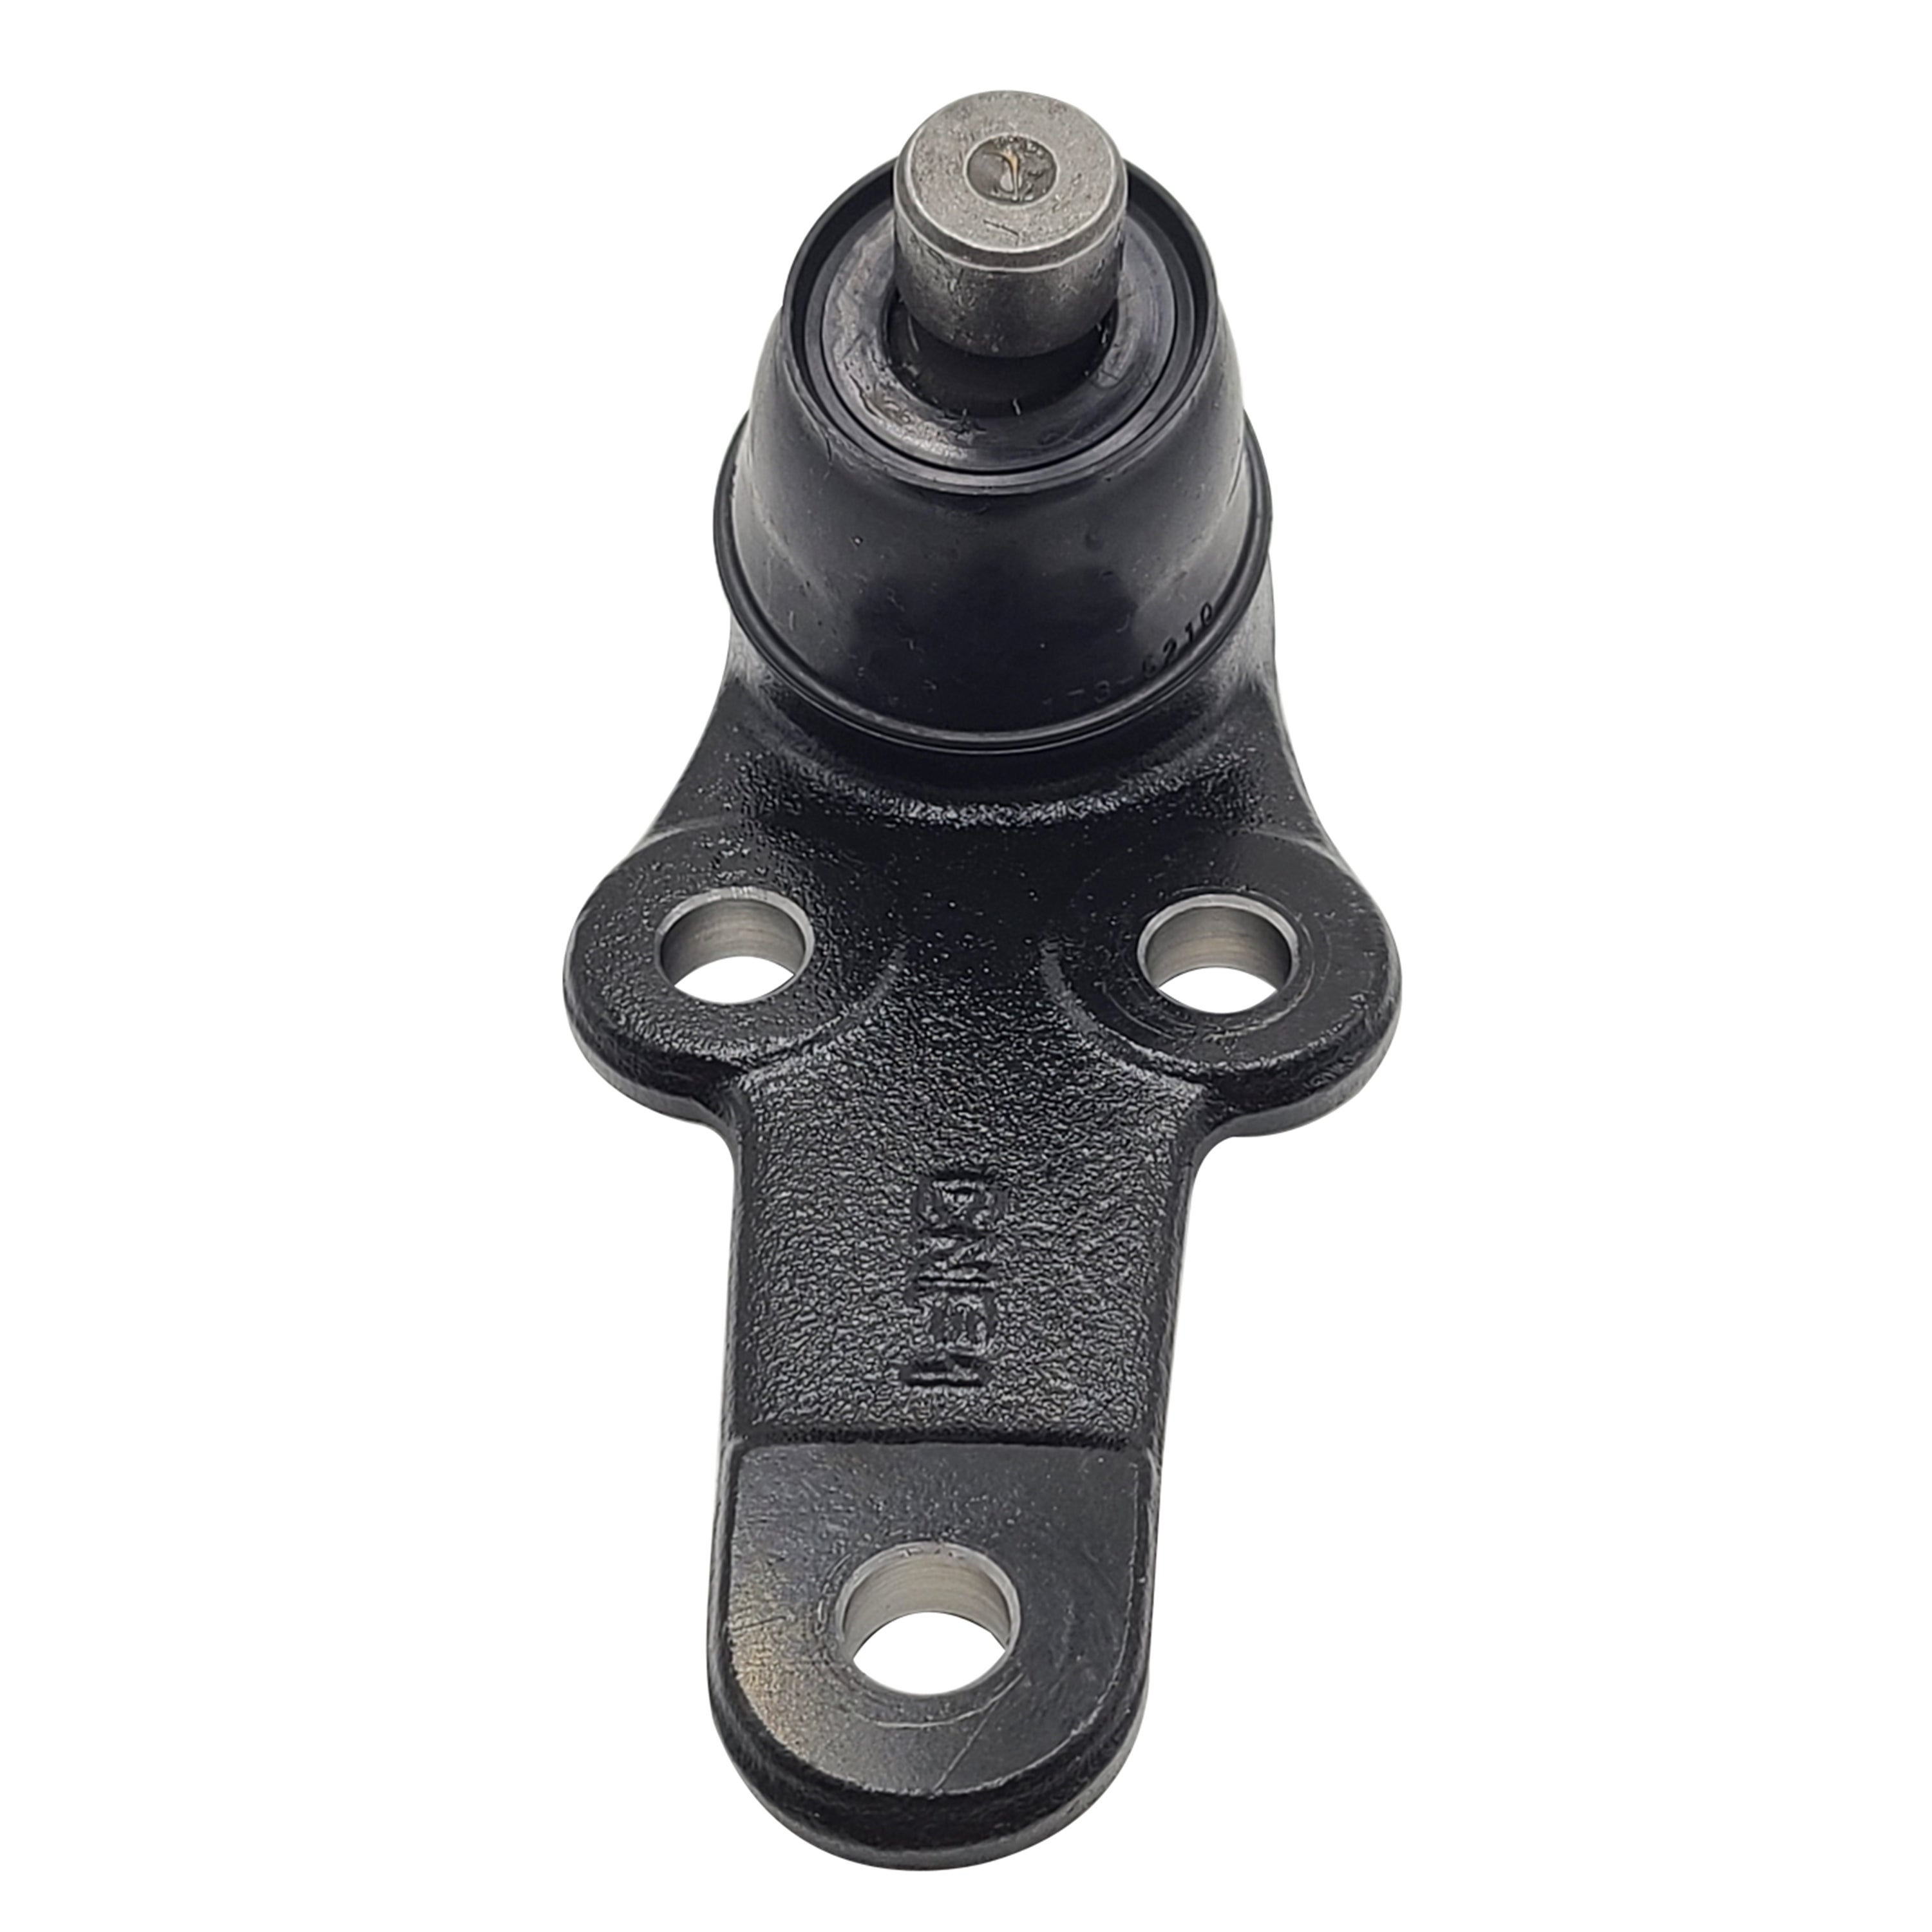 Ball Joint, CTR, 1679401, CBF-23, FORD (Europe) (025381)